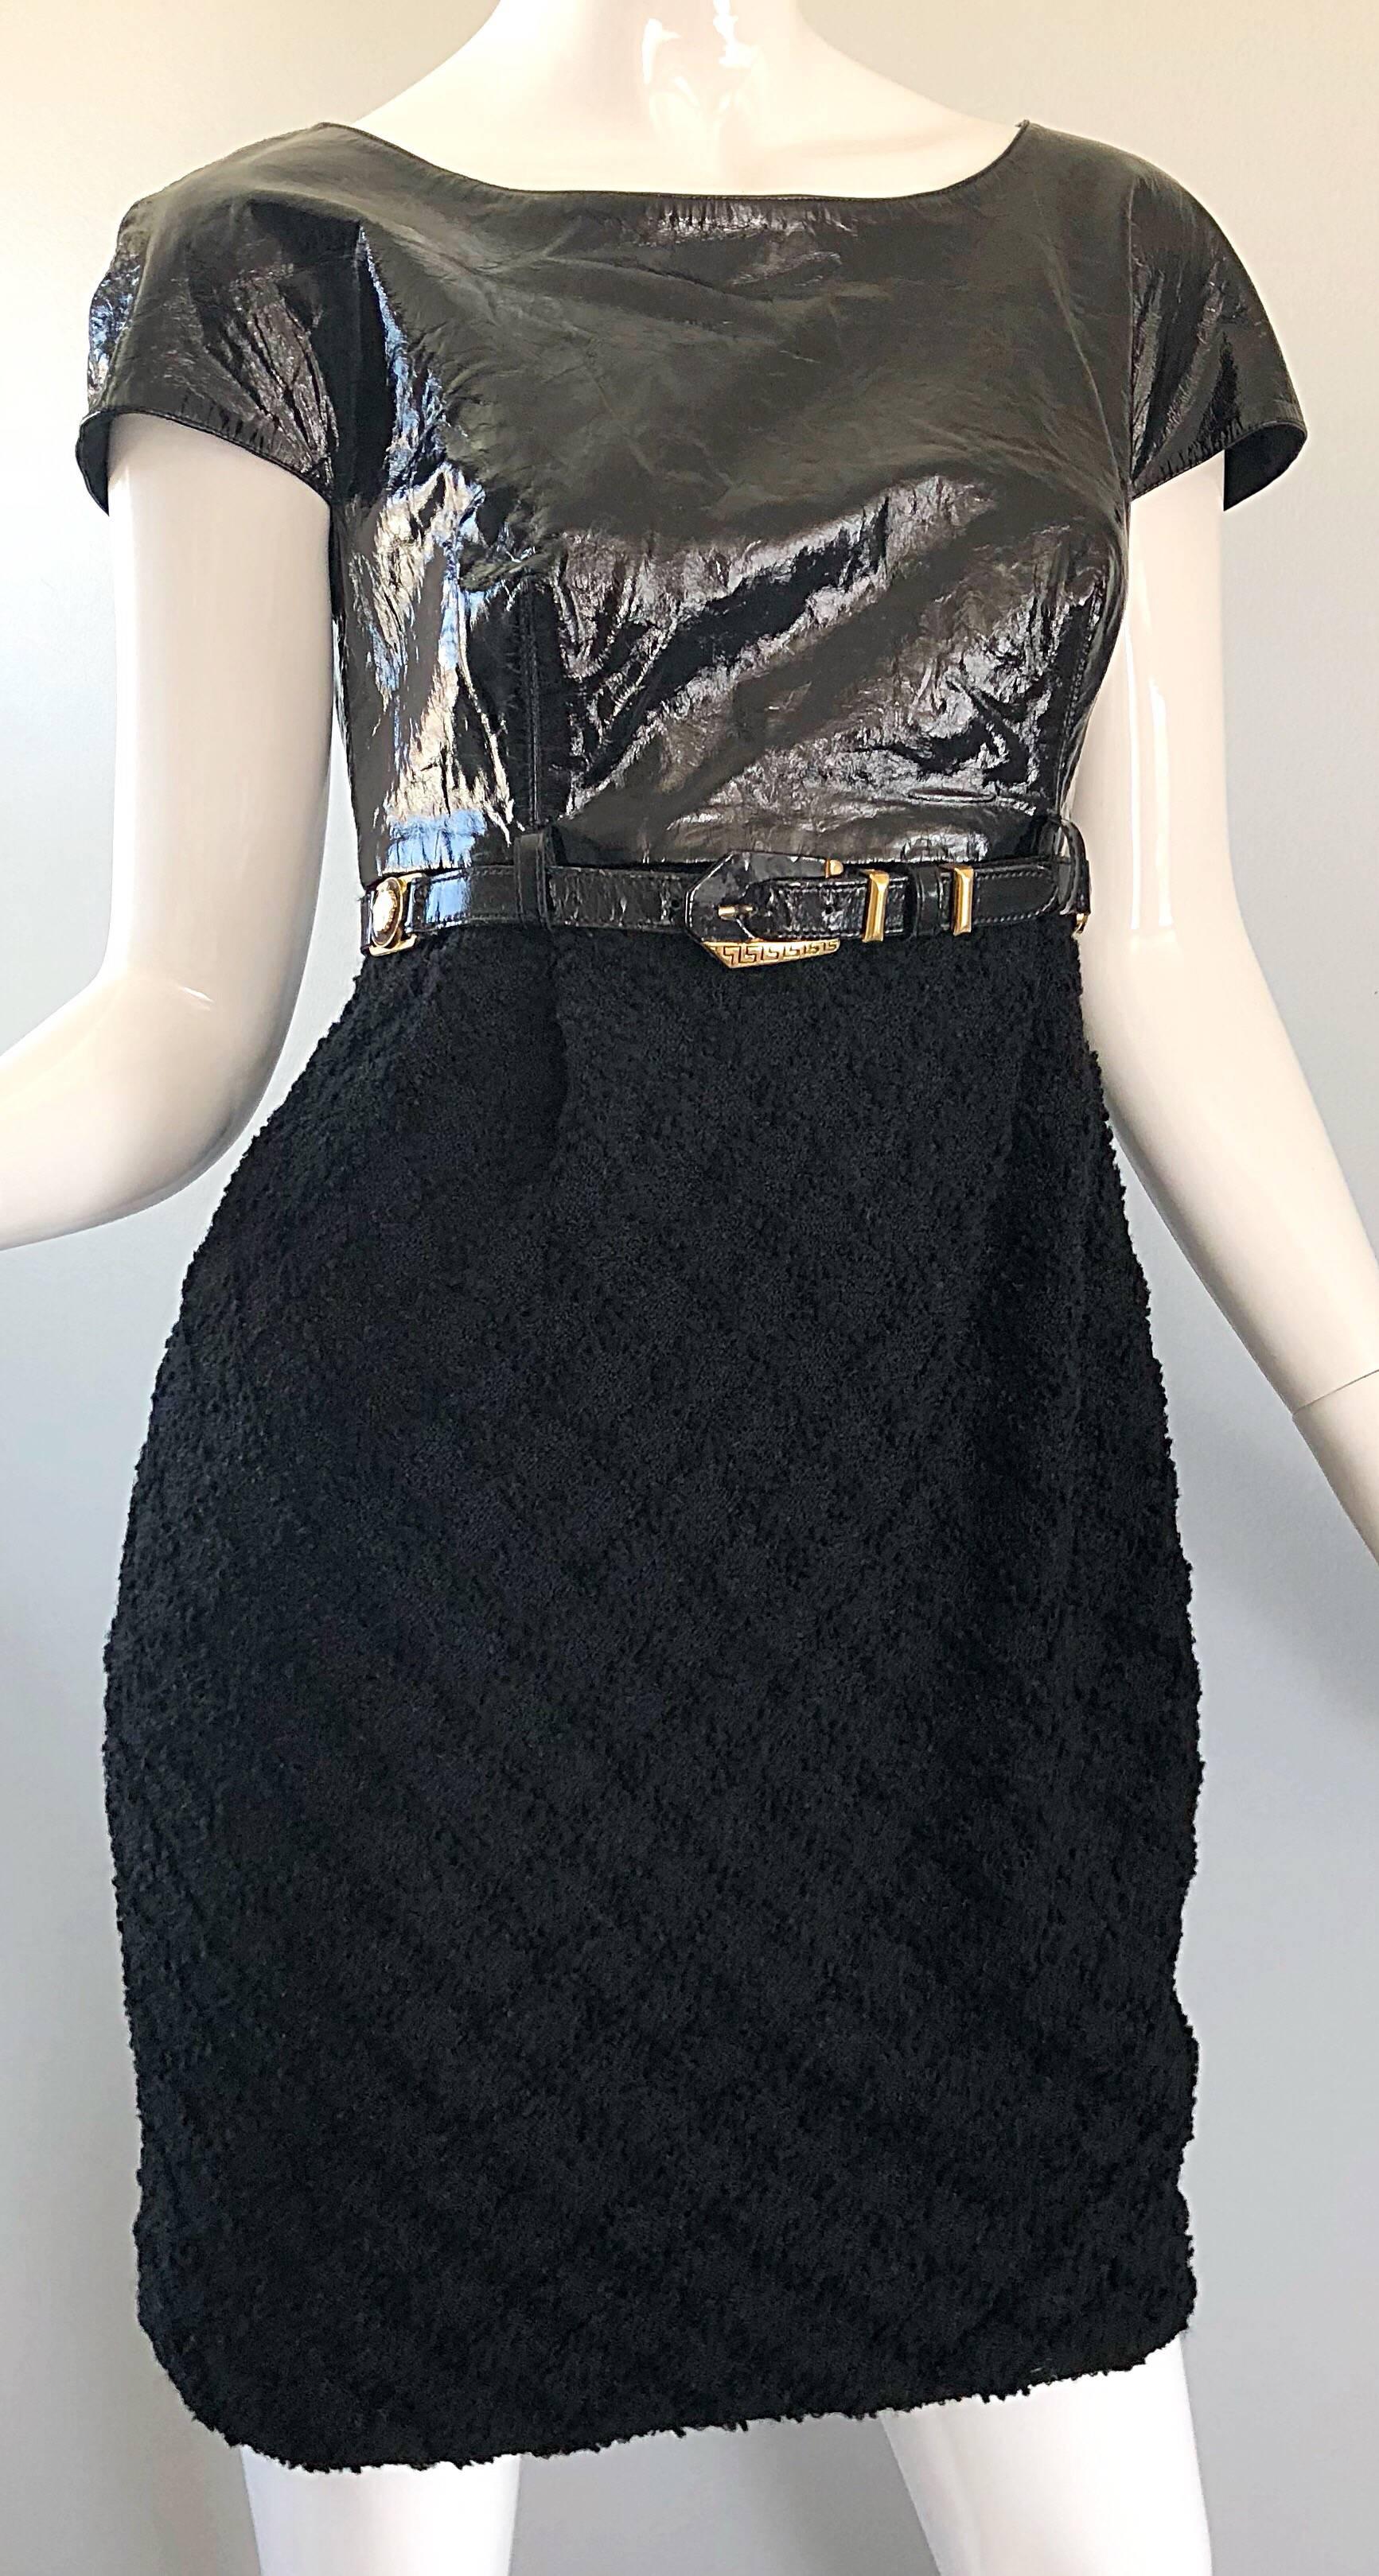 Documented Gianni Versace Couture Vintage F/W 1994 Black PVC Wool 90s Dress In Excellent Condition For Sale In San Diego, CA